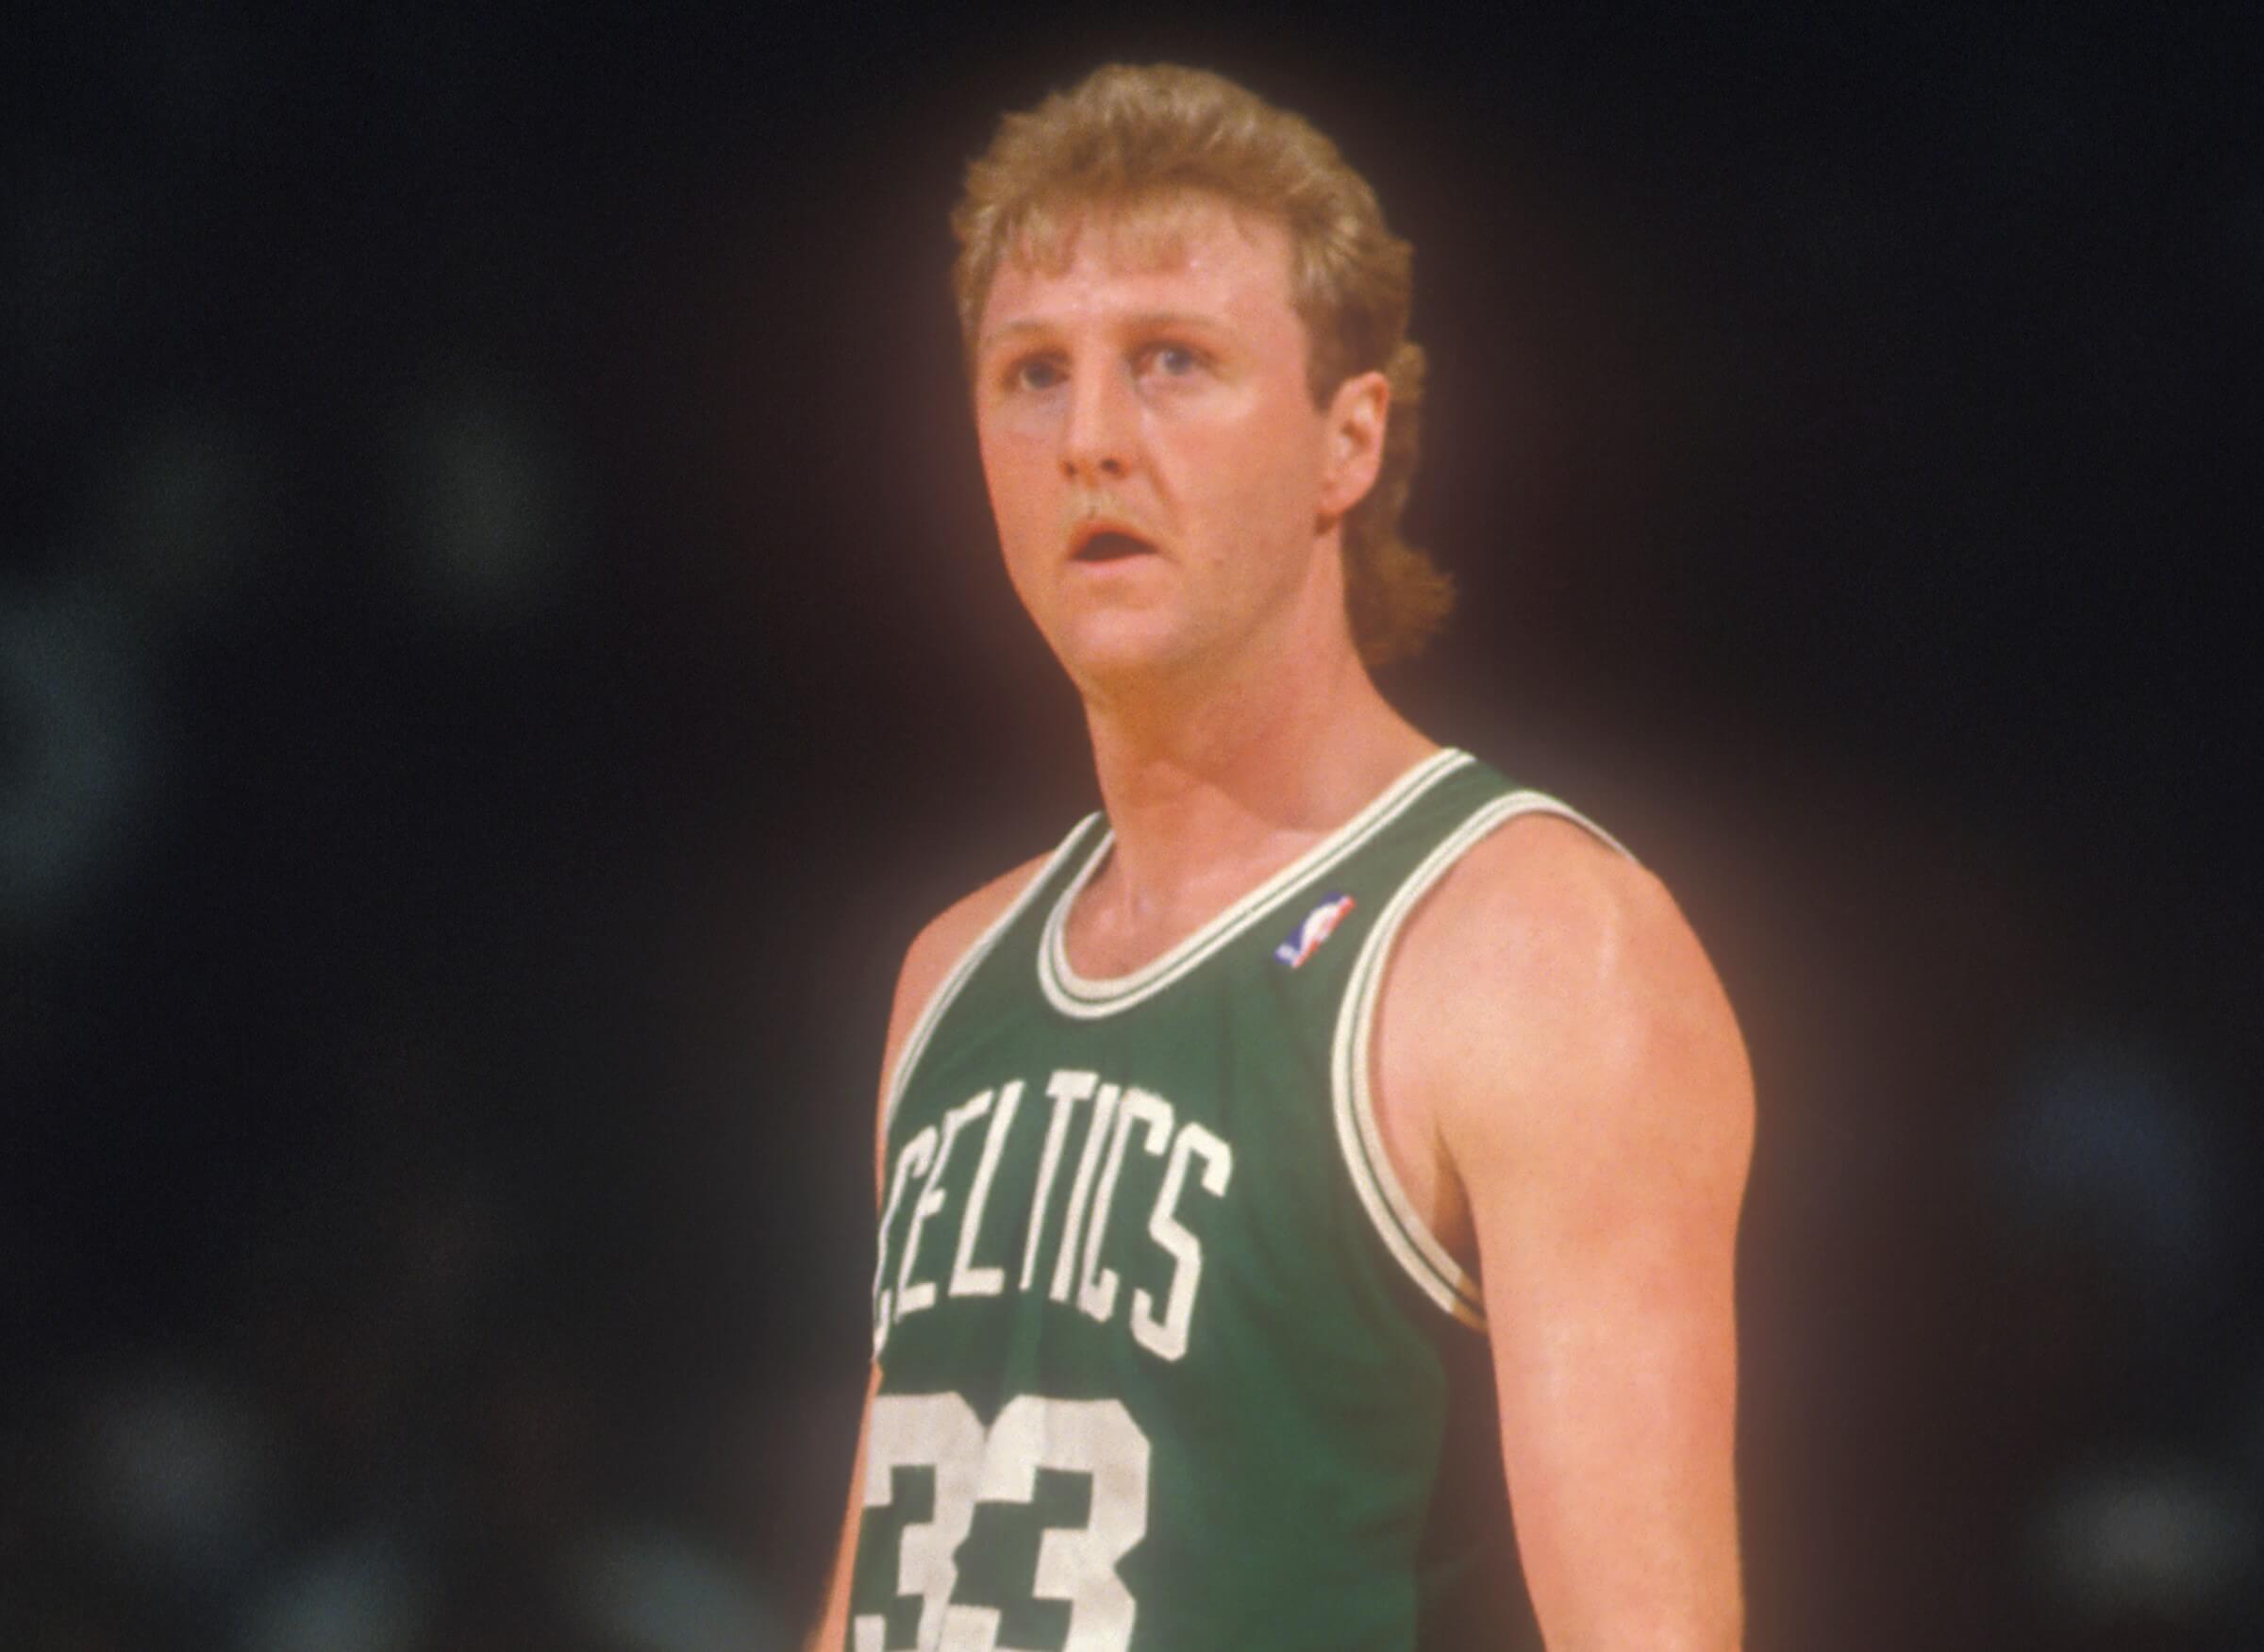 While Accepting His 3rd Straight MVP Award, Larry Bird Criticized Wilt Chamberlain and Then Acted Just Like Him